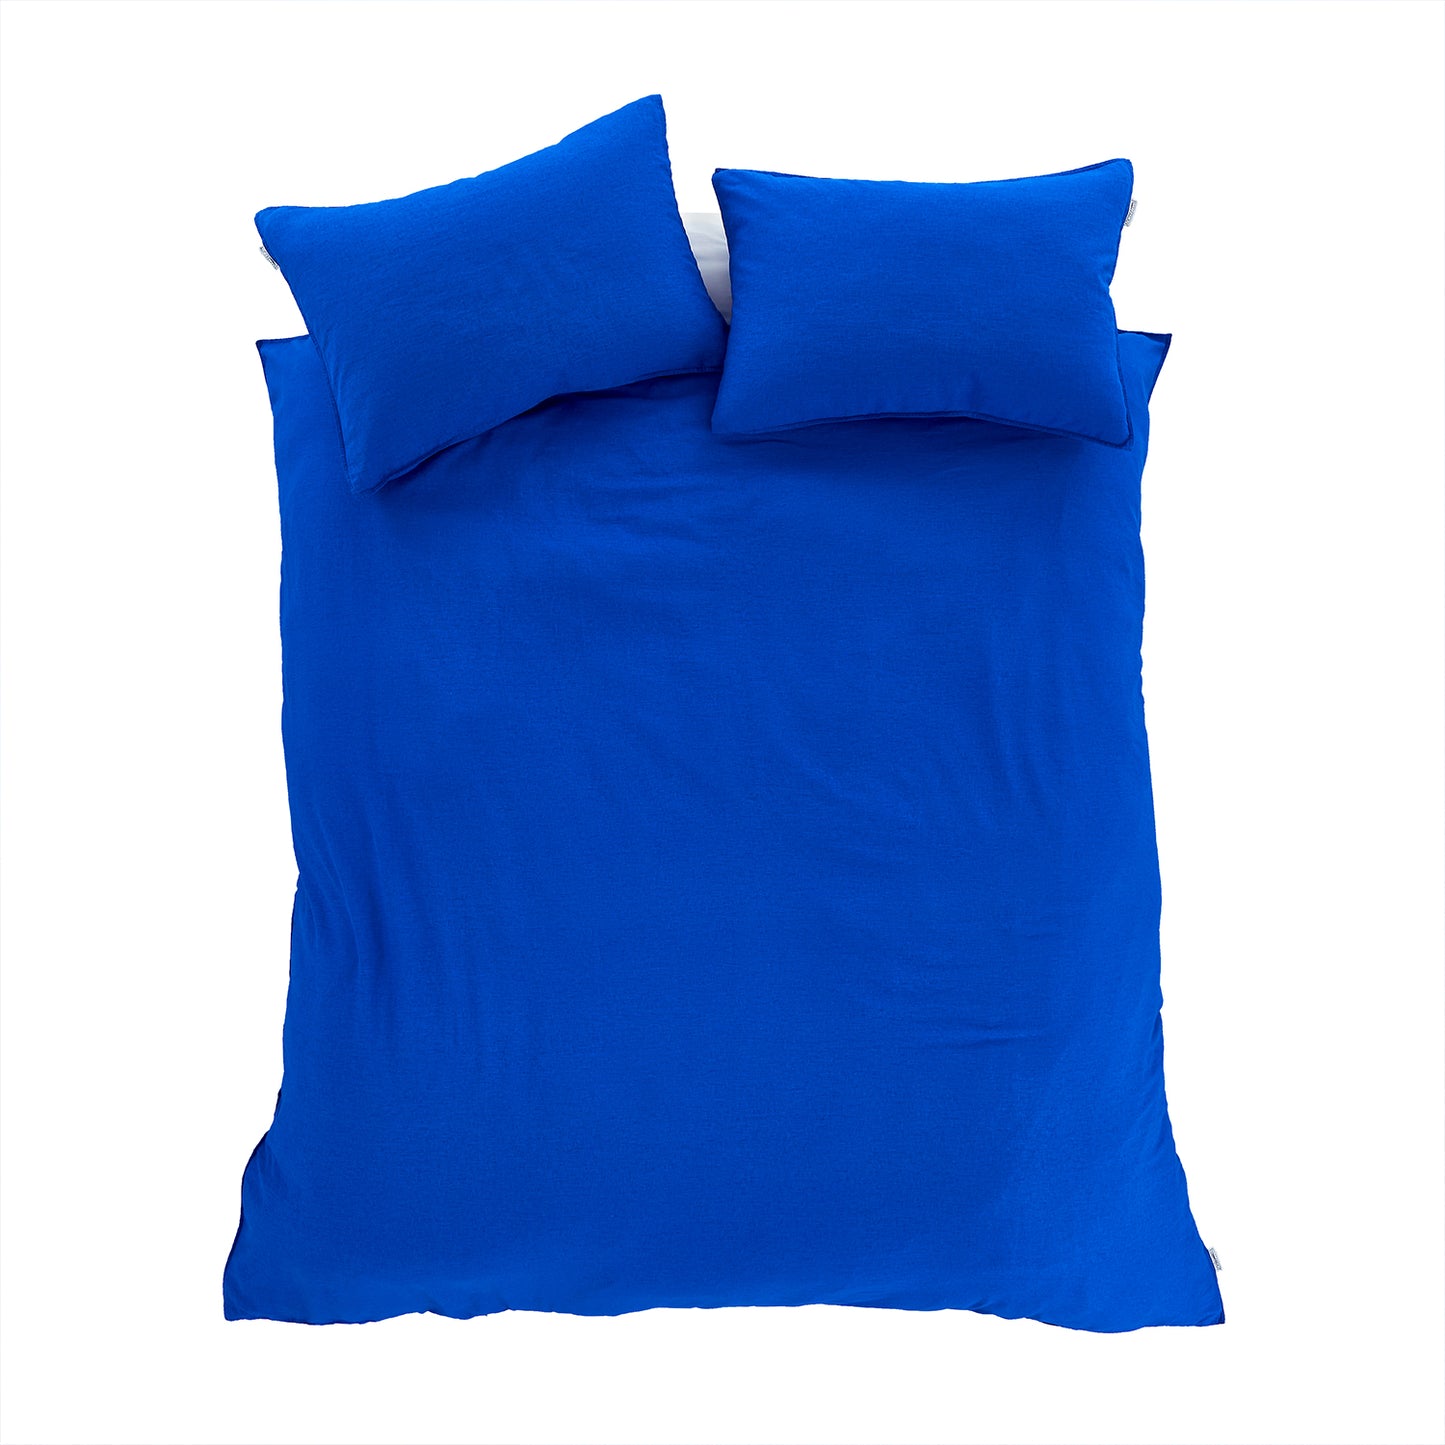 Content By Terence Conran Blue Relaxed Cotton Linen Duvet Set